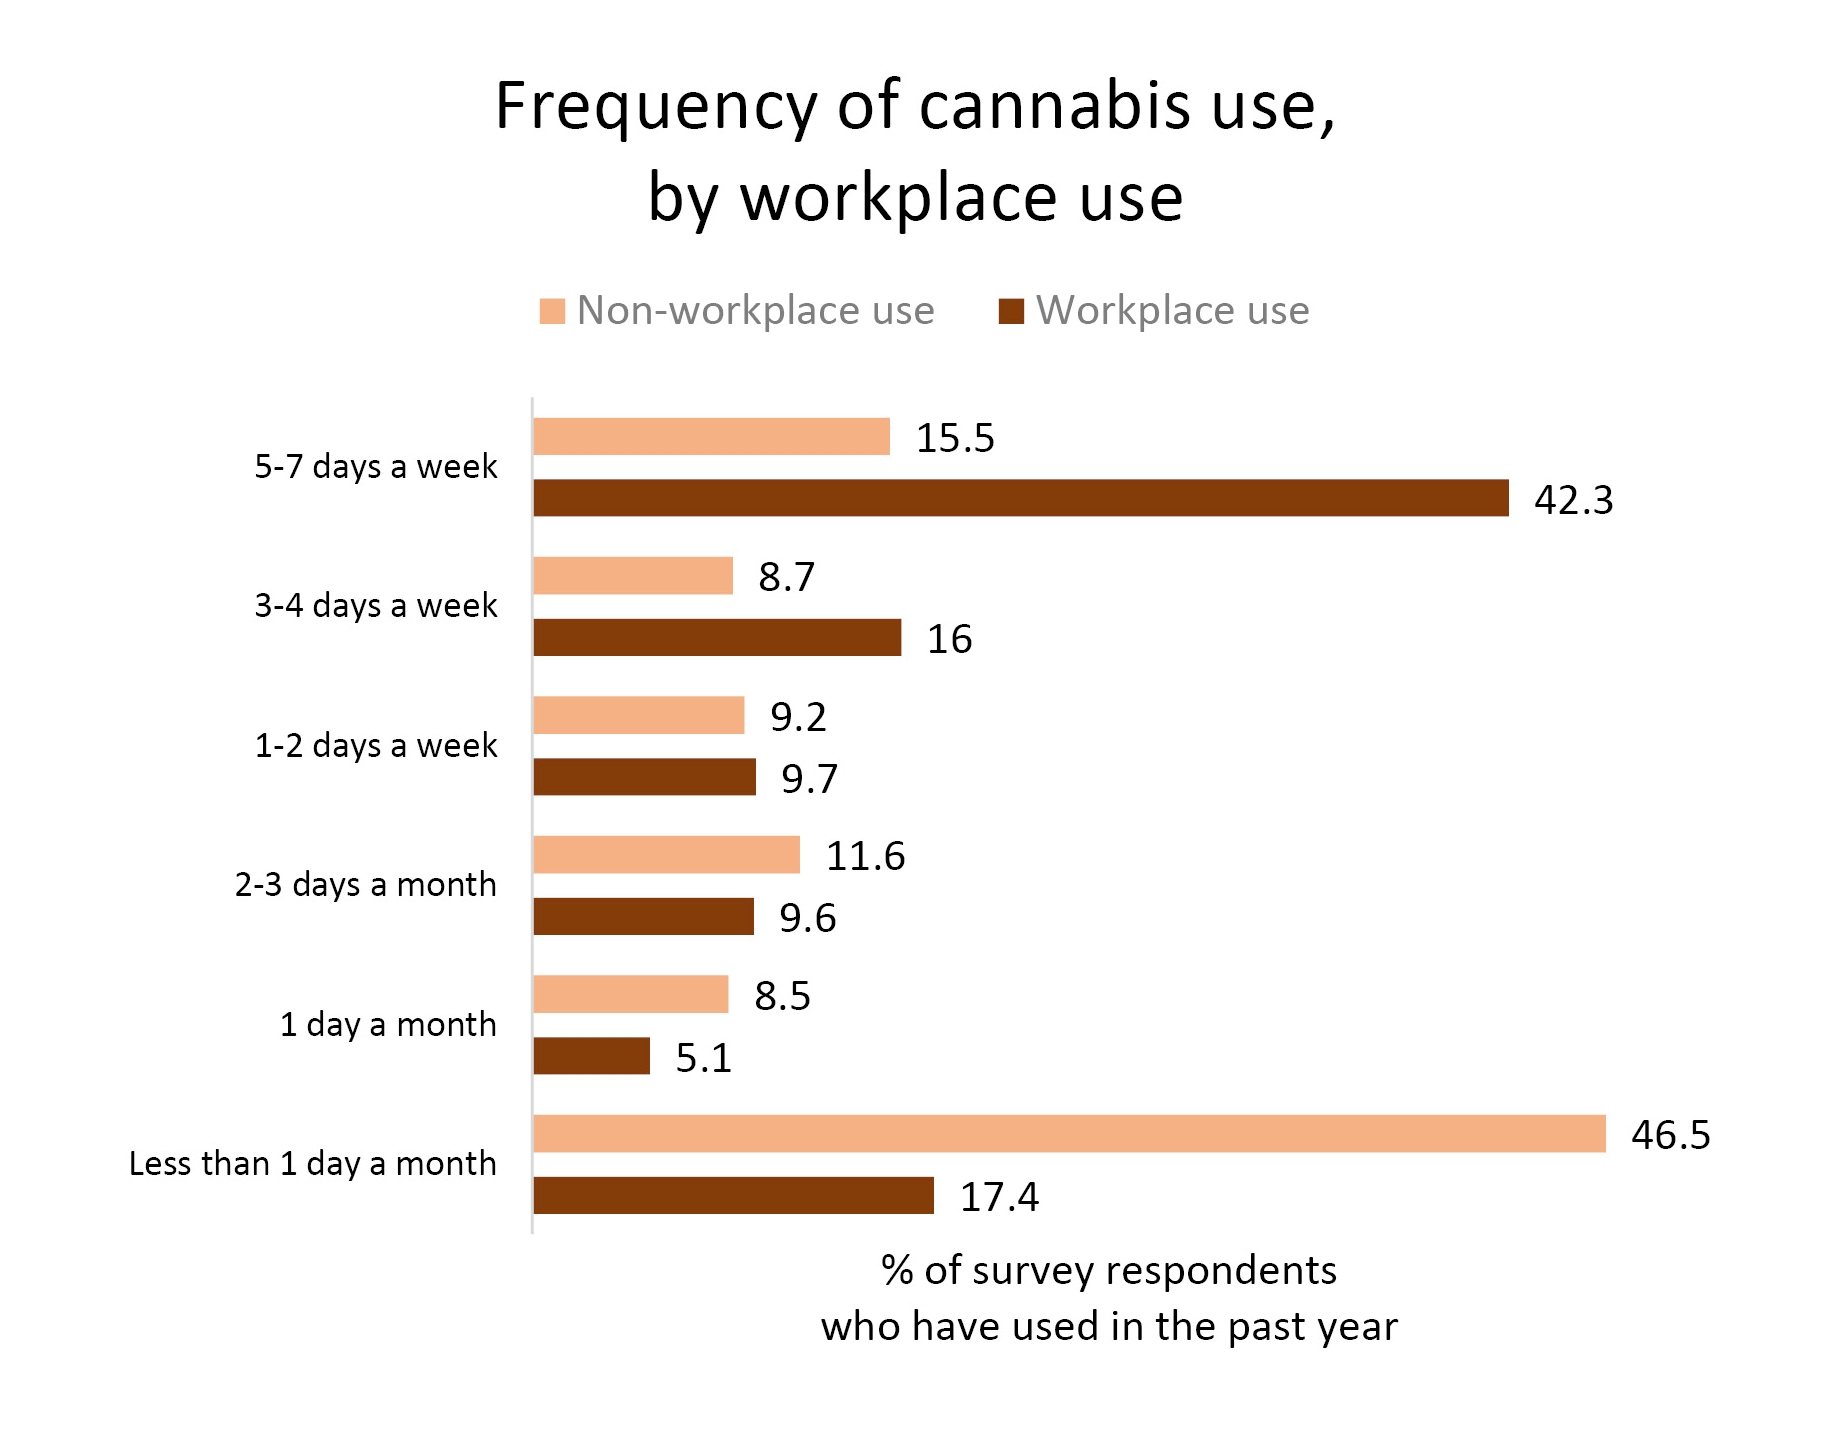 A bar graph showing the frequency of cannabis use in two groups, those used cannabis in the past year but not at work, and those who used in the past year and at work. Of the non-workplace users, the largest share (46.5 per cent) used less than once a month. Of the at-work users, the largest share (42.3 per cent) used cannabis five to seven days a week.